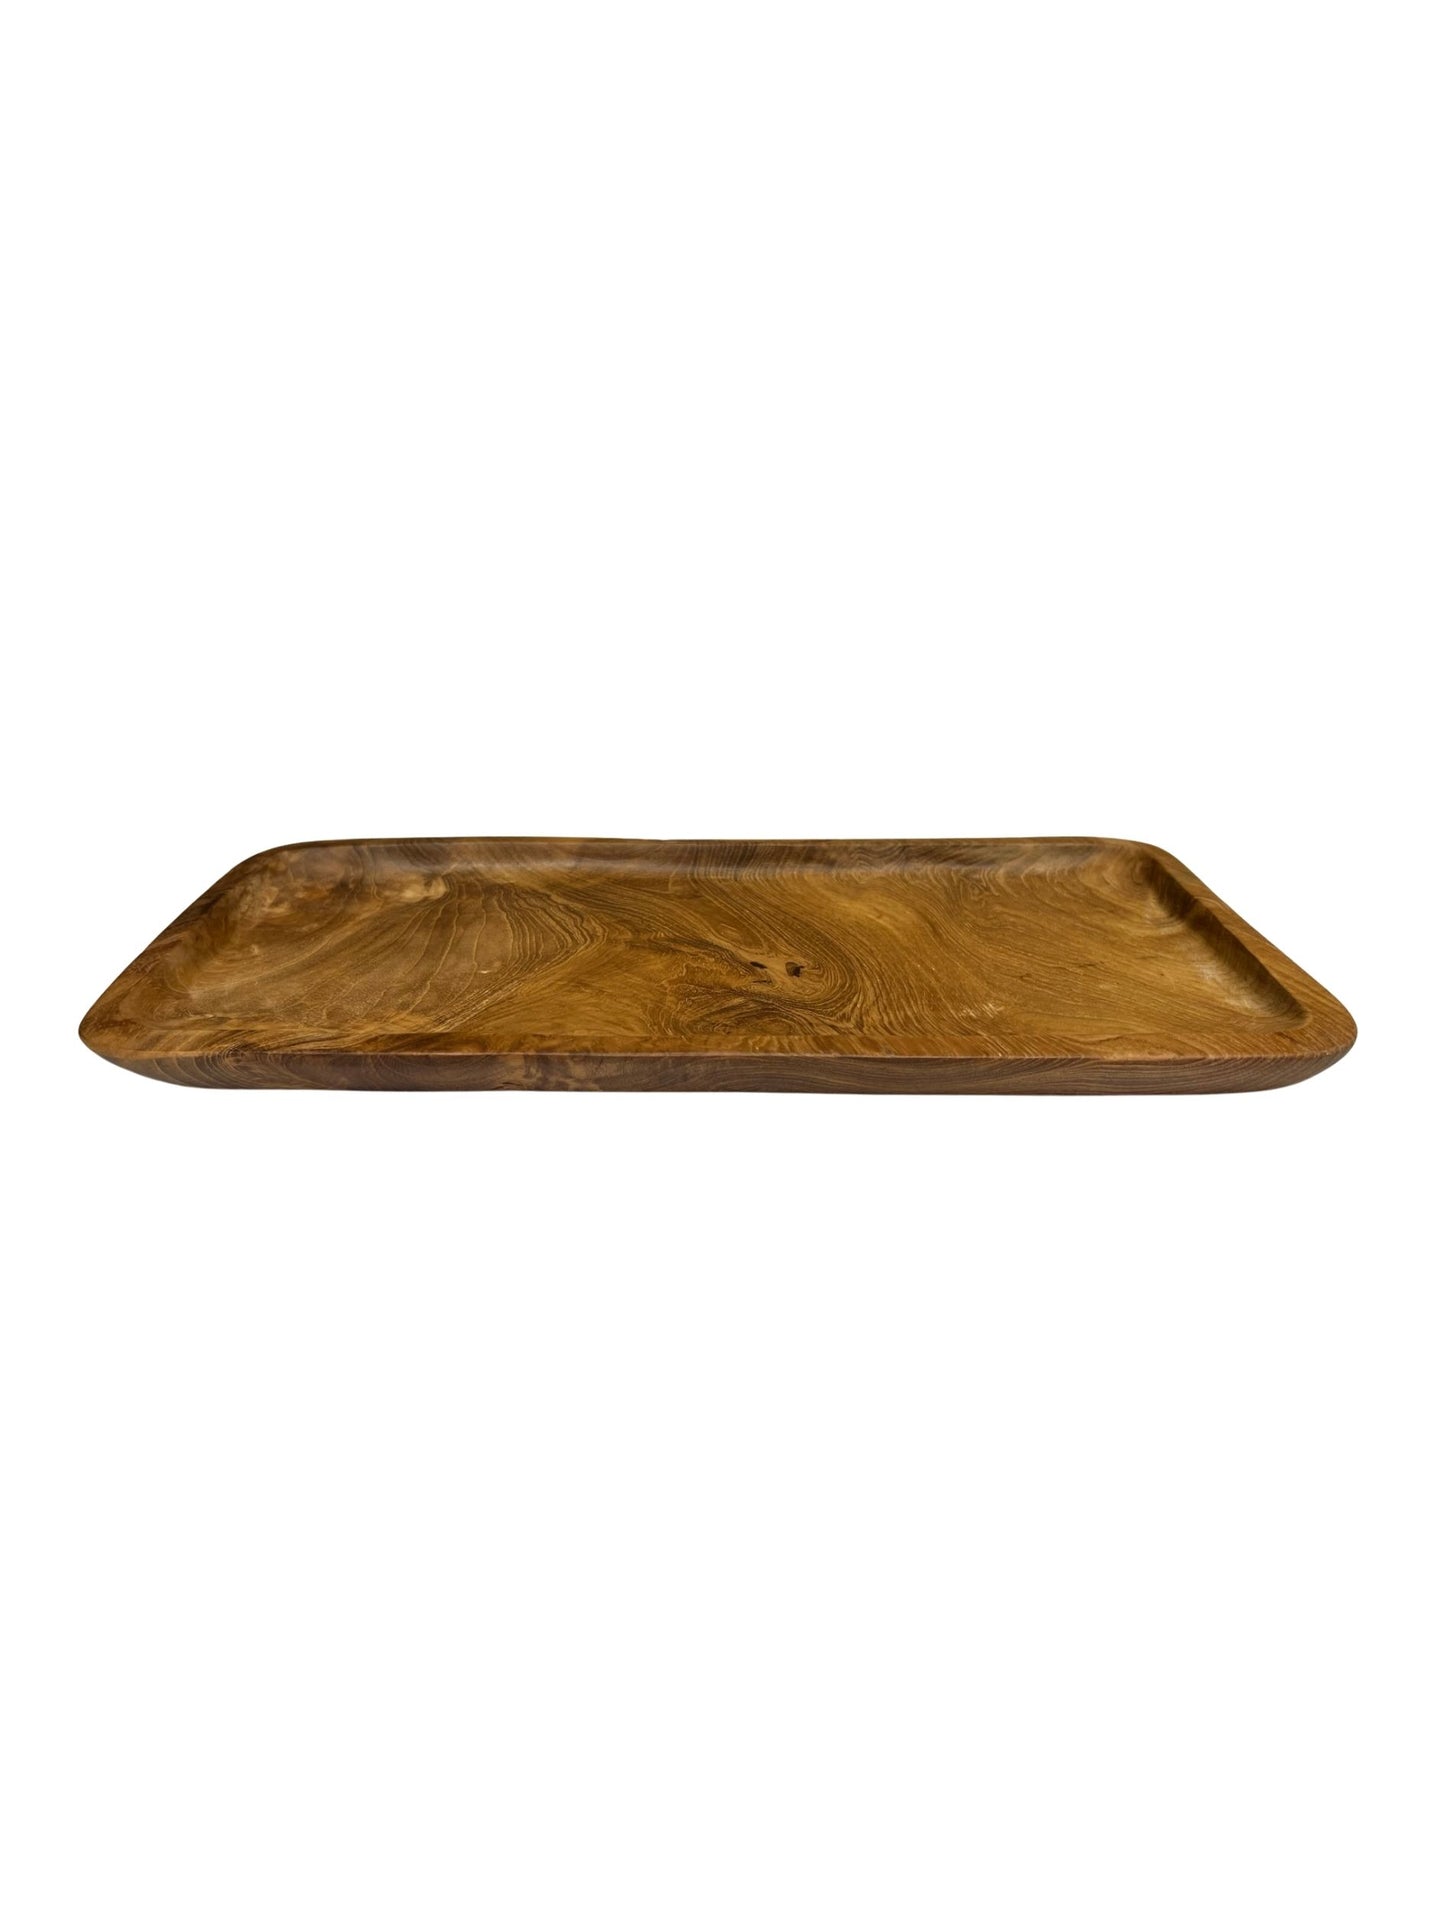 Eclectic Home Accent Teak Tray 2897 Natural  Decor Furniture